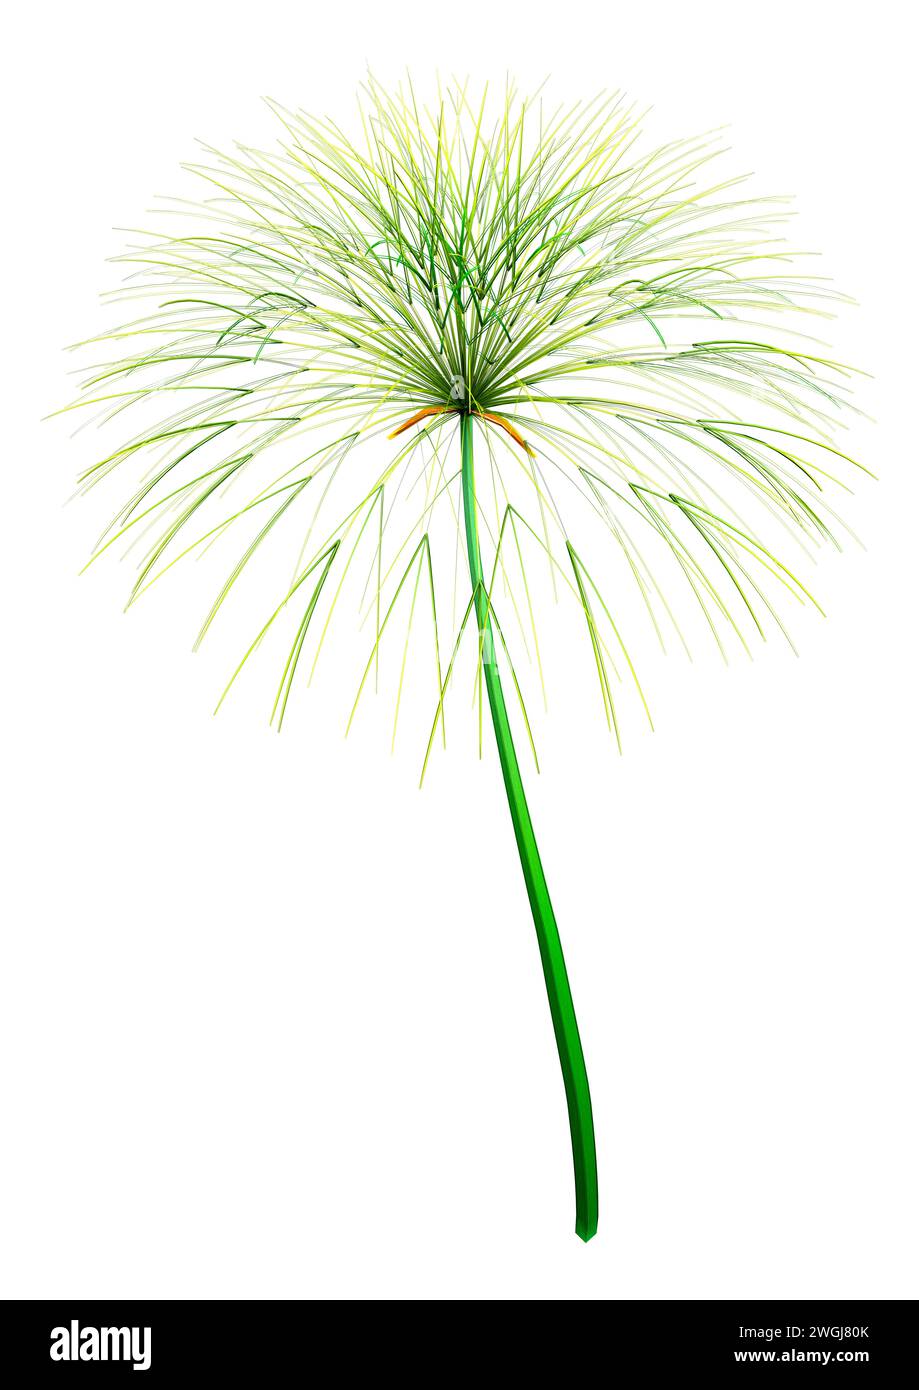 3D rendering of a papyrus plant or Cyperus papyrus or Nile grass isolated on white background Stock Photo